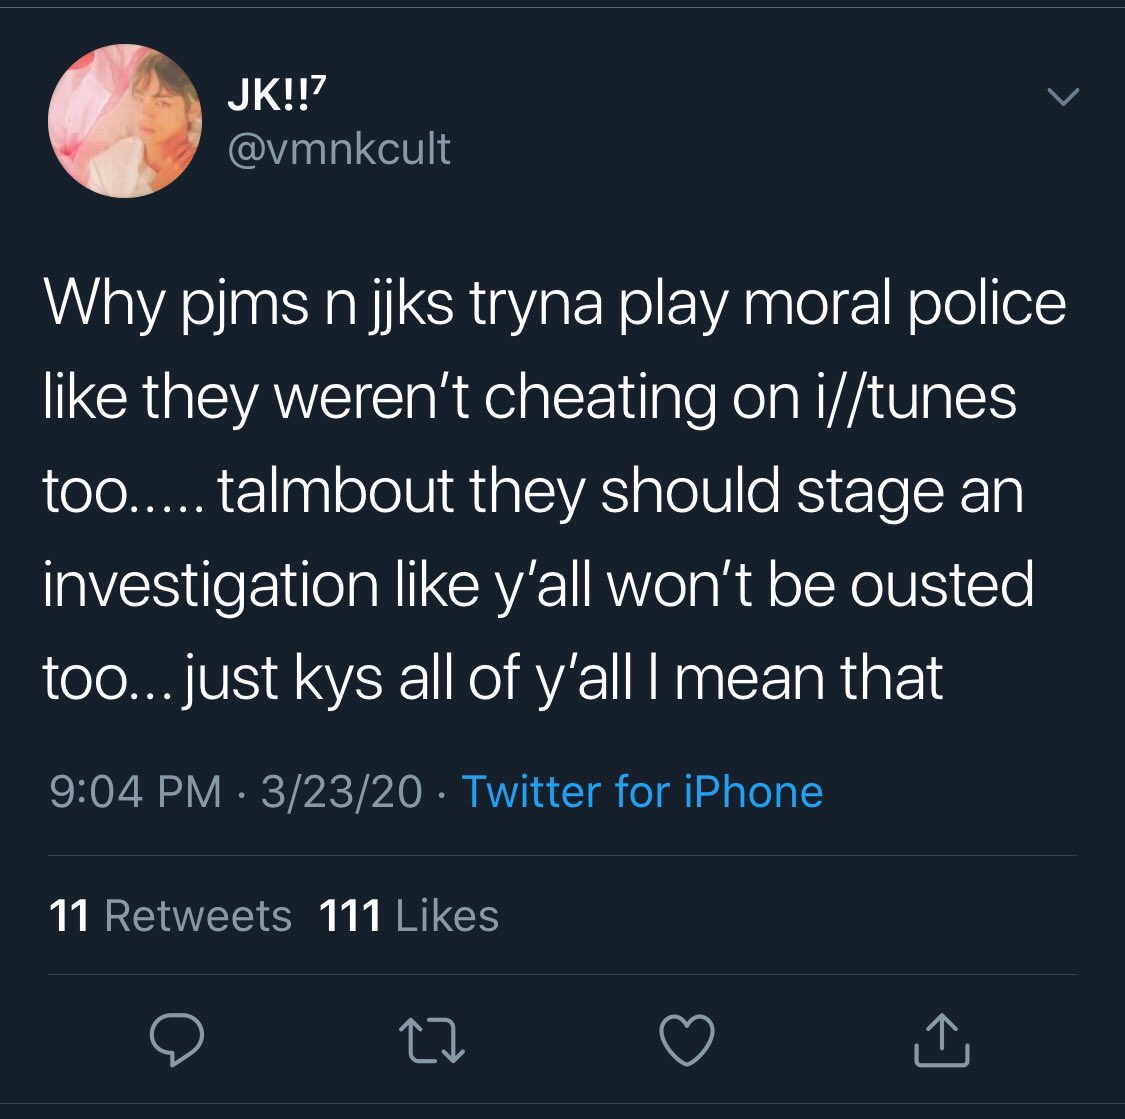 around that time filter was high on us itunes as well so people said pjm and jjk solo stans were having a “pissing contest” and “using v//pn” when there was literally no evidence of this. and then guess which songs charted on billboard hot 100 and everyone celebrated like +